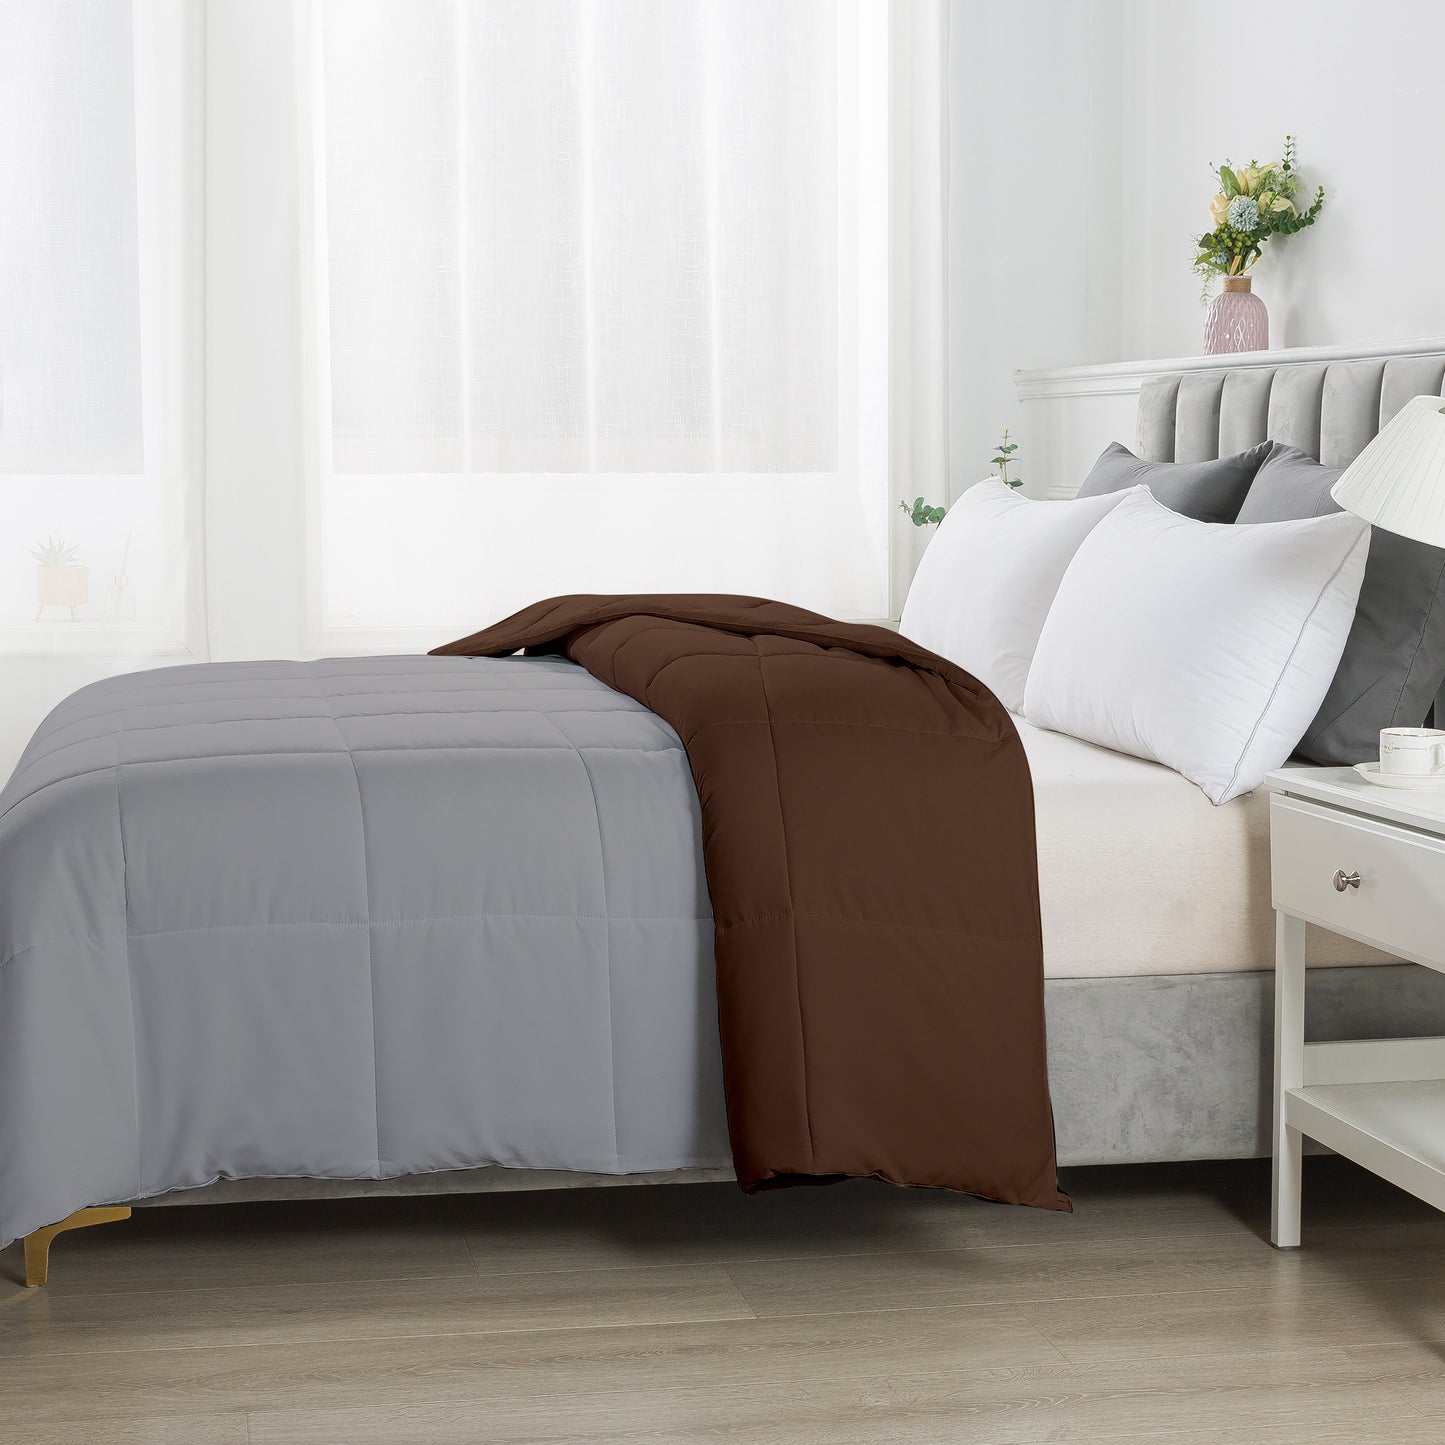 Razzai - 200 GSM Soft AC Comforter Hotel Quality-Down Alternative Reversible Comforter - All Season |AC Comforter/Blanket/Quilt/Rajai Double Bed|Silver/Chocolate Brown